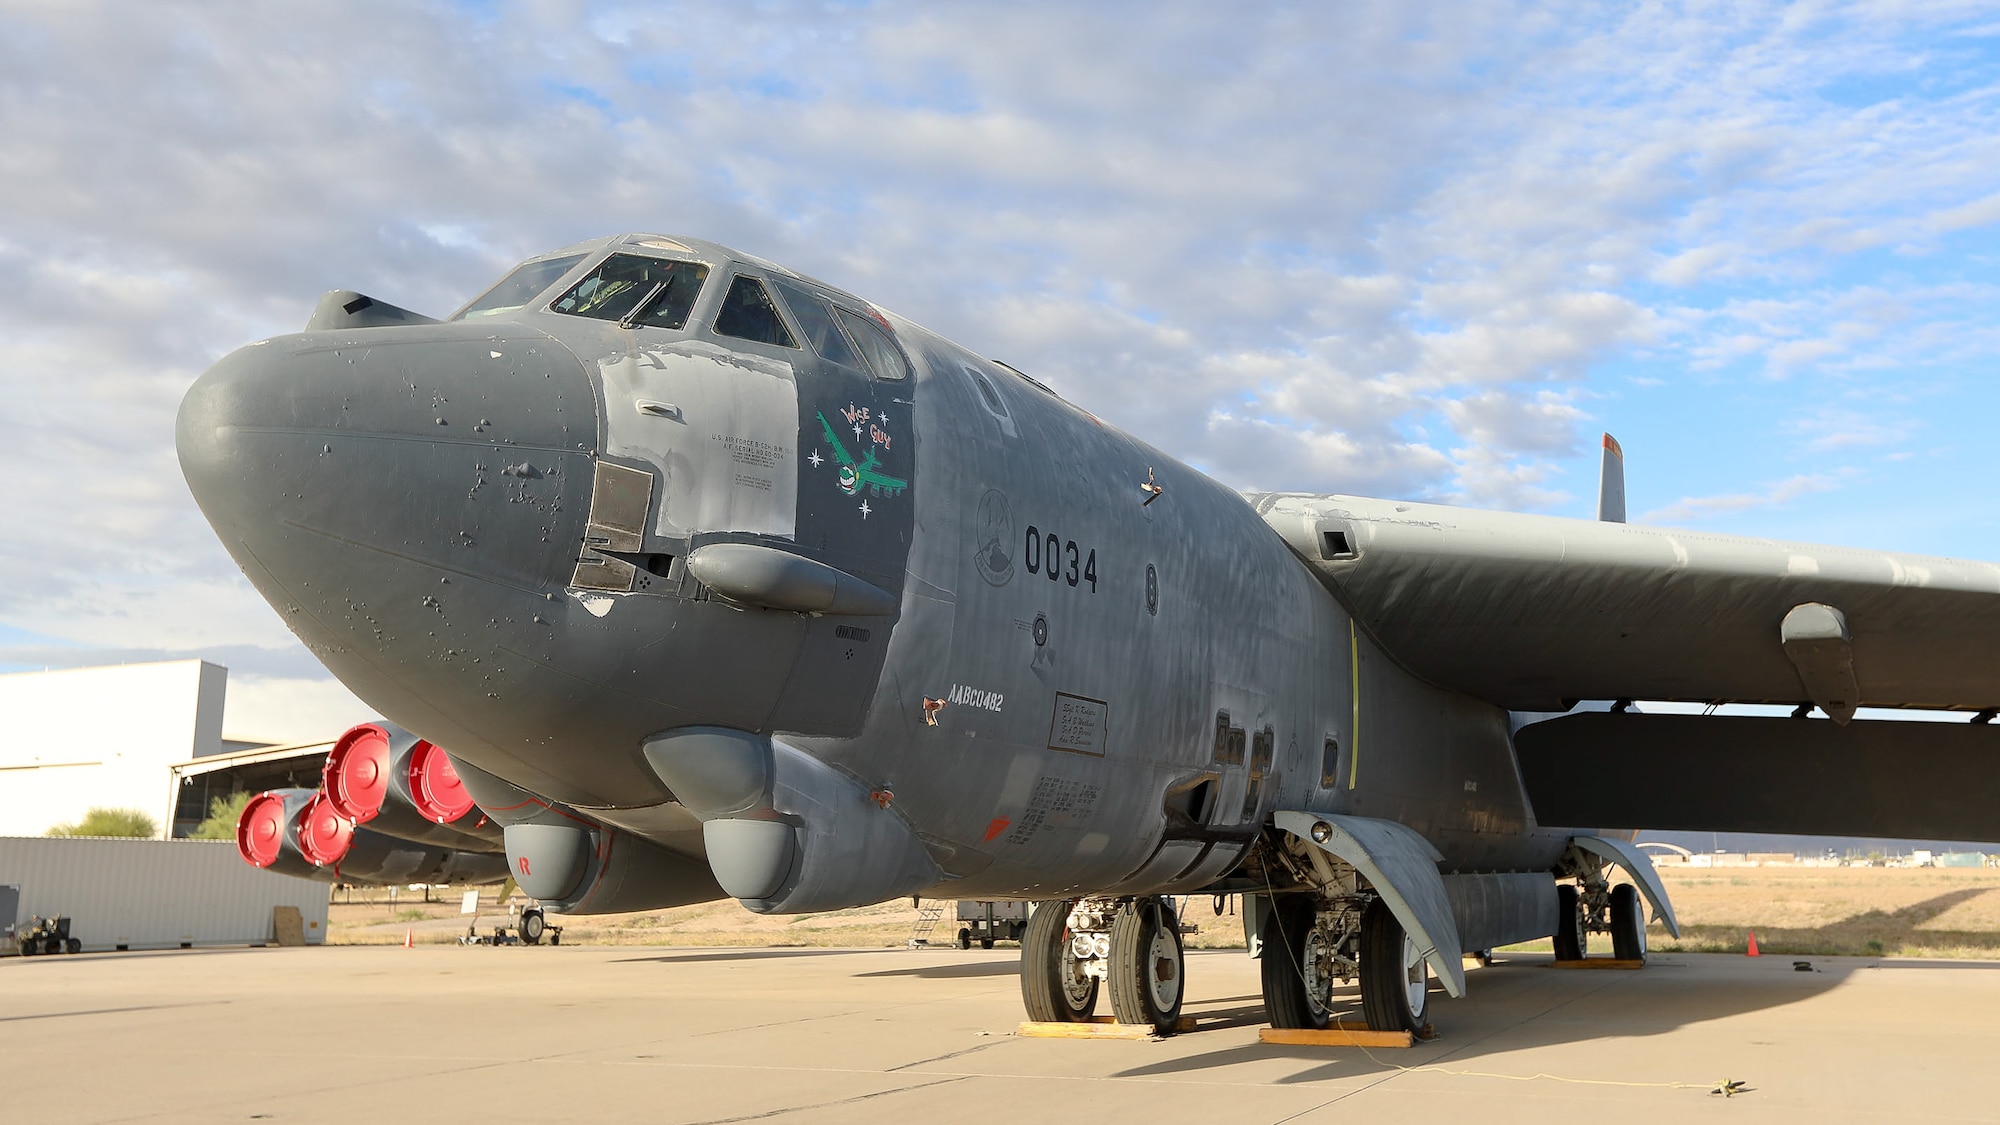 A B-52H Stratofortress, nicknamed "Wise Guy," on the ramp at Davis-Monthan Air Force Base, Ariz., March 12, 2019. The B-52H completed phase one of its regeneration process at the 309th Aerospace Maintenance and Regeneration Group. It is being returned to service to replace a B-52 lost during takeoff in 2016. (U.S. Air Force photo by Teresa D. Pittman)